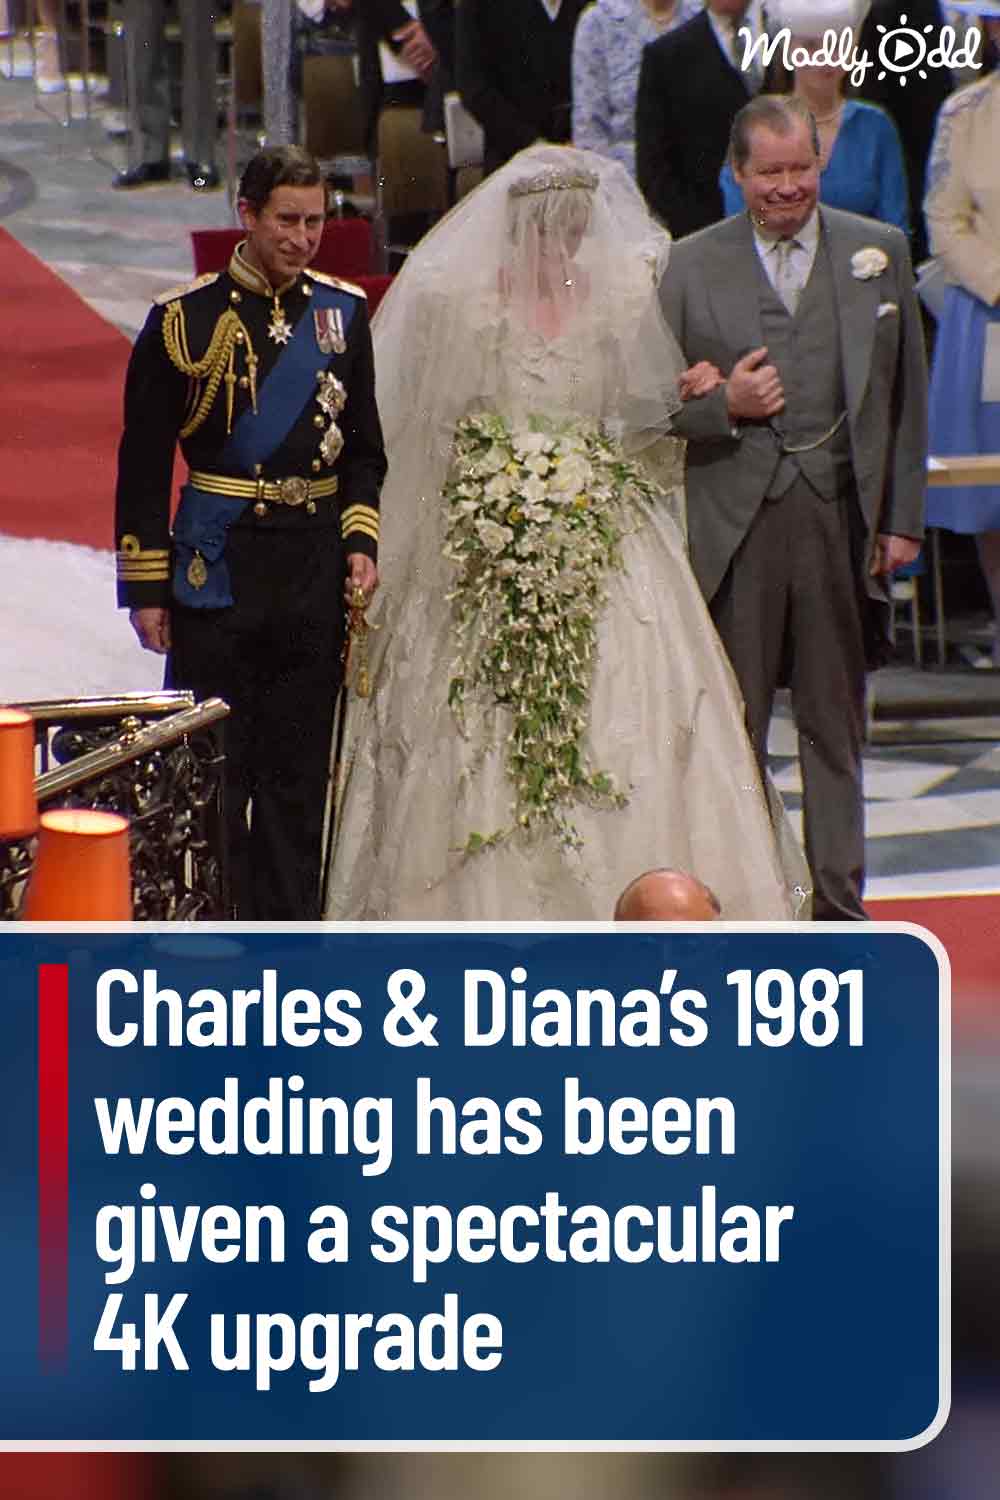 Charles & Diana’s 1981 wedding has been given a spectacular 4K upgrade